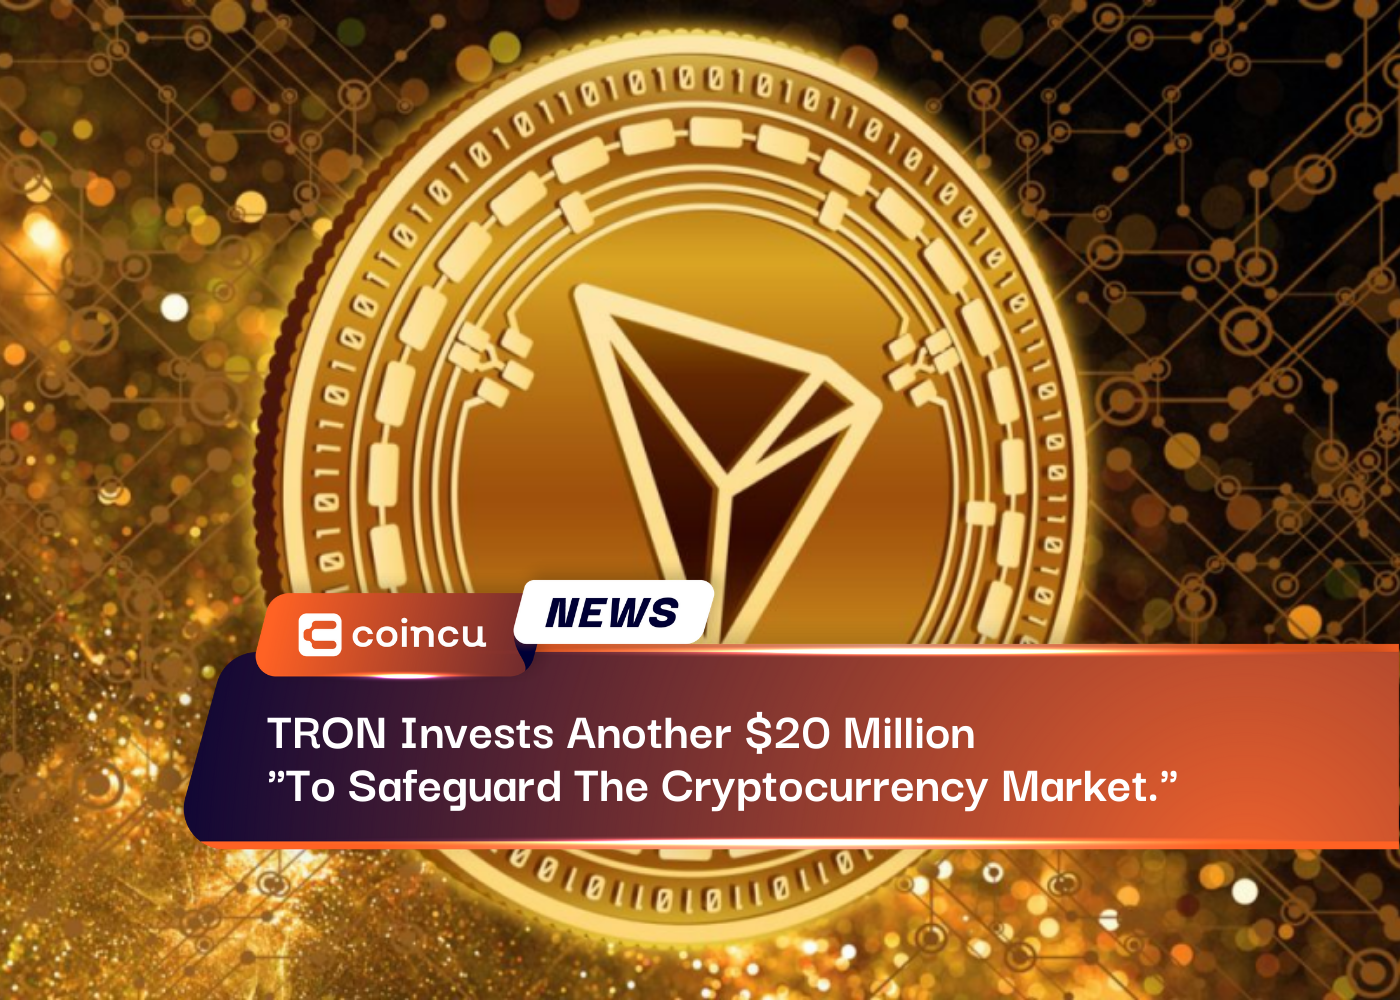 TRON Invests Another $20 Million "To Safeguard The Cryptocurrency Market."